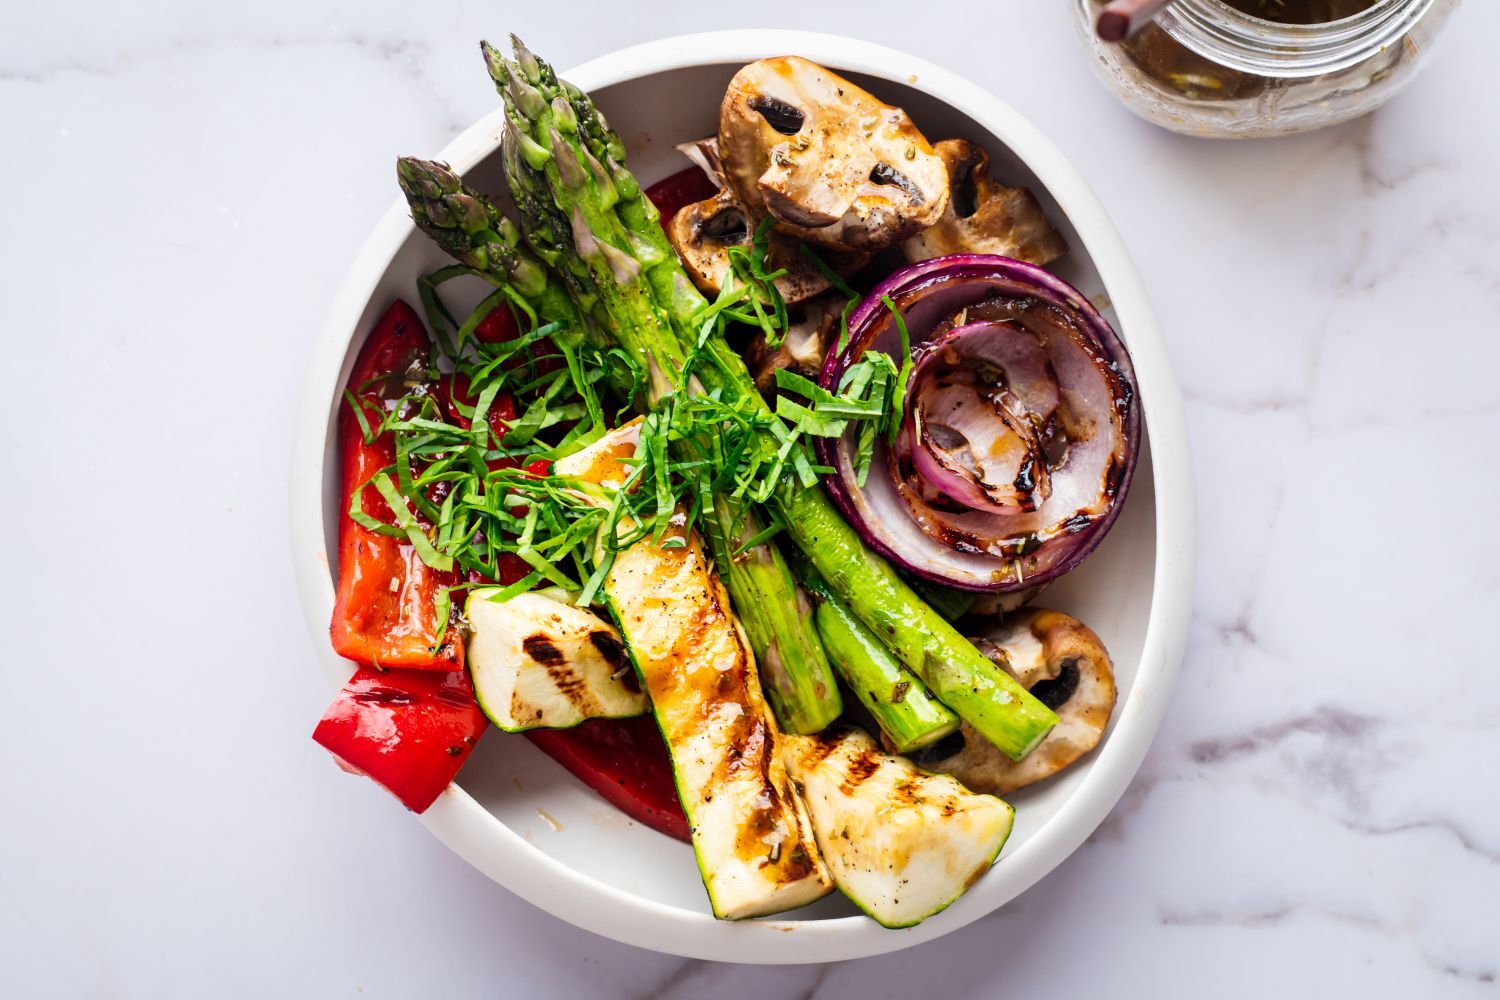 Grilled marinated vegetables with balsamic marinade in a white bowl.